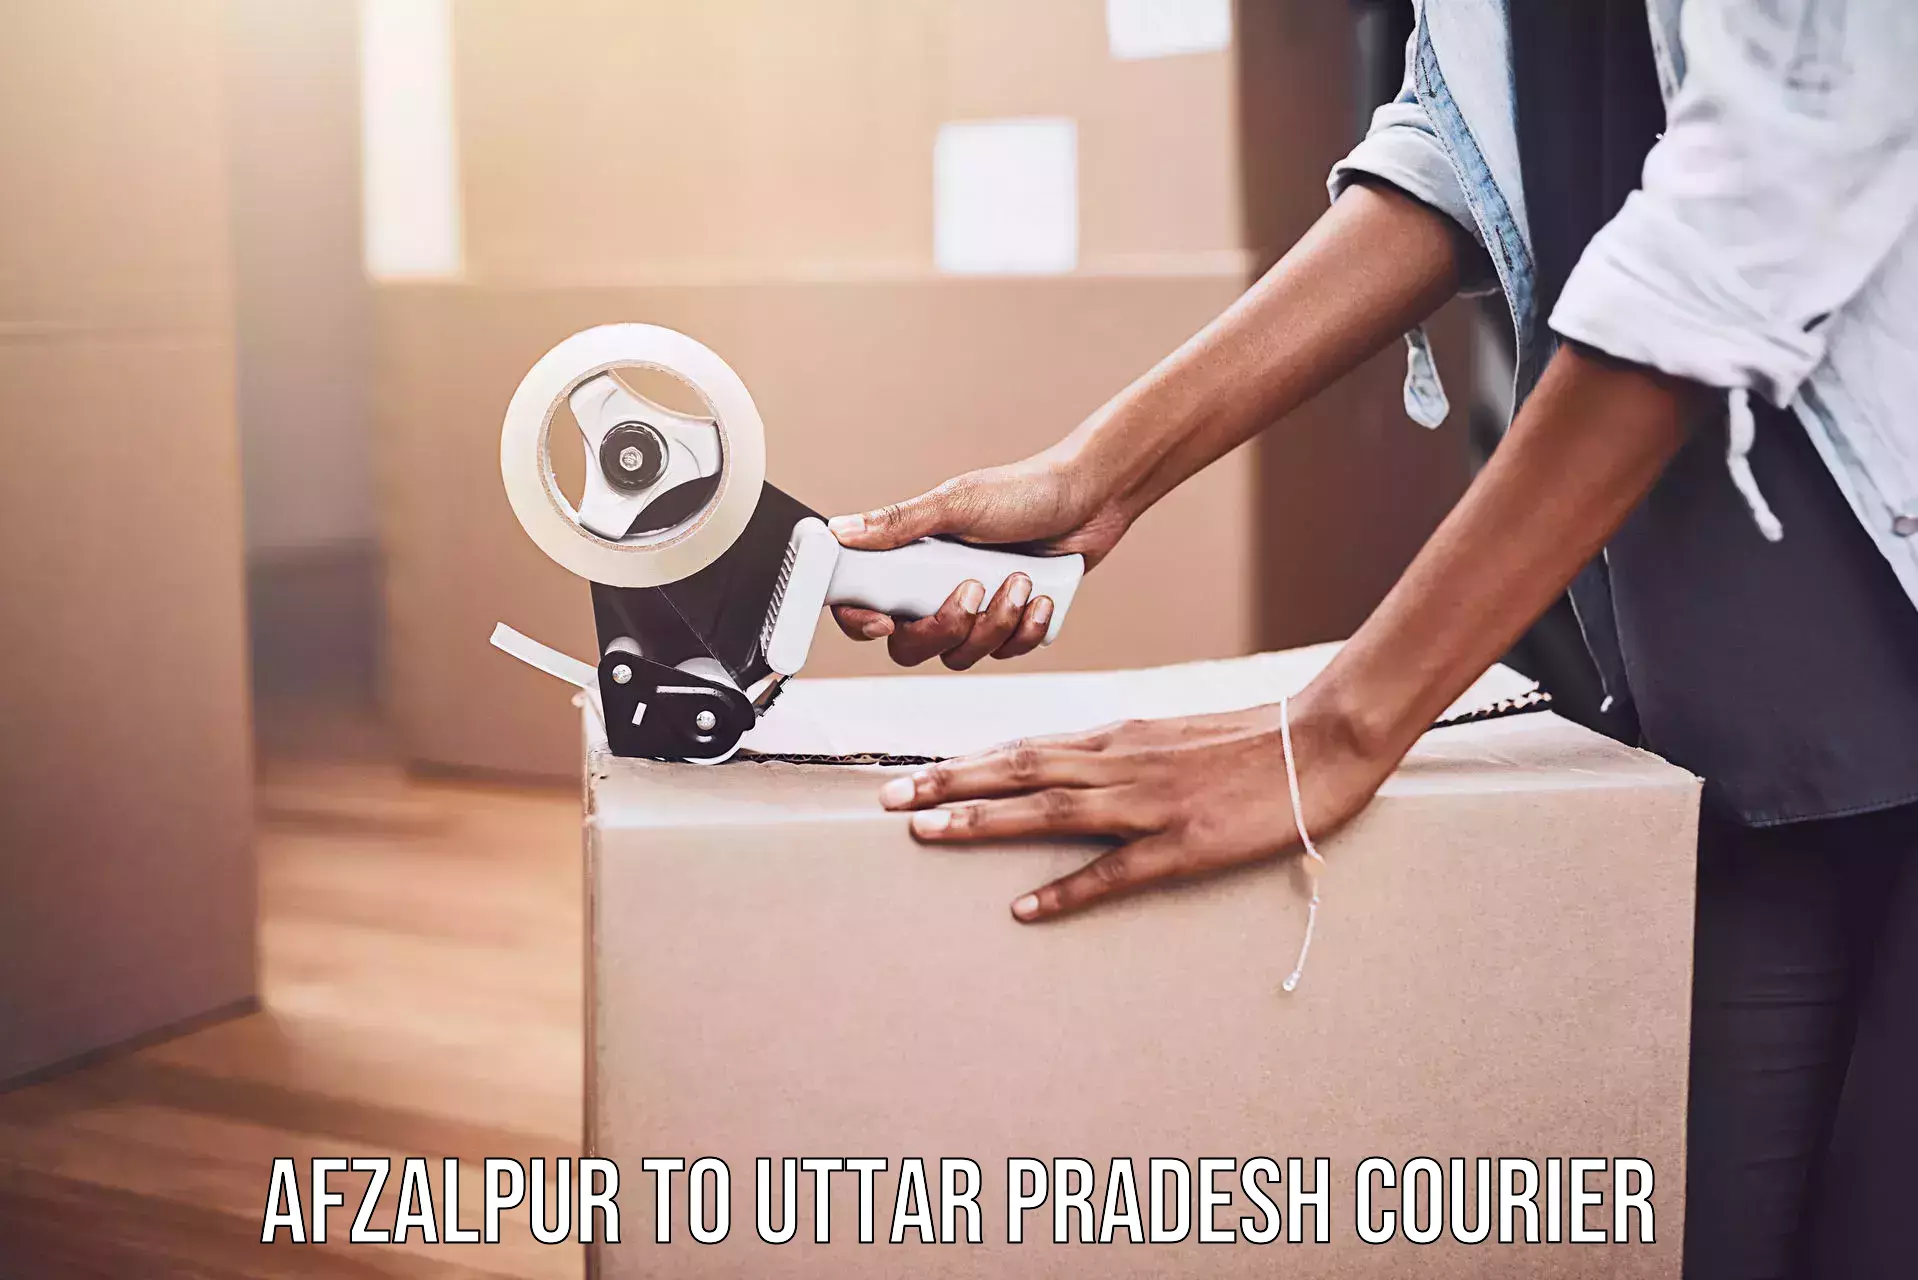 Large package courier Afzalpur to Moradabad